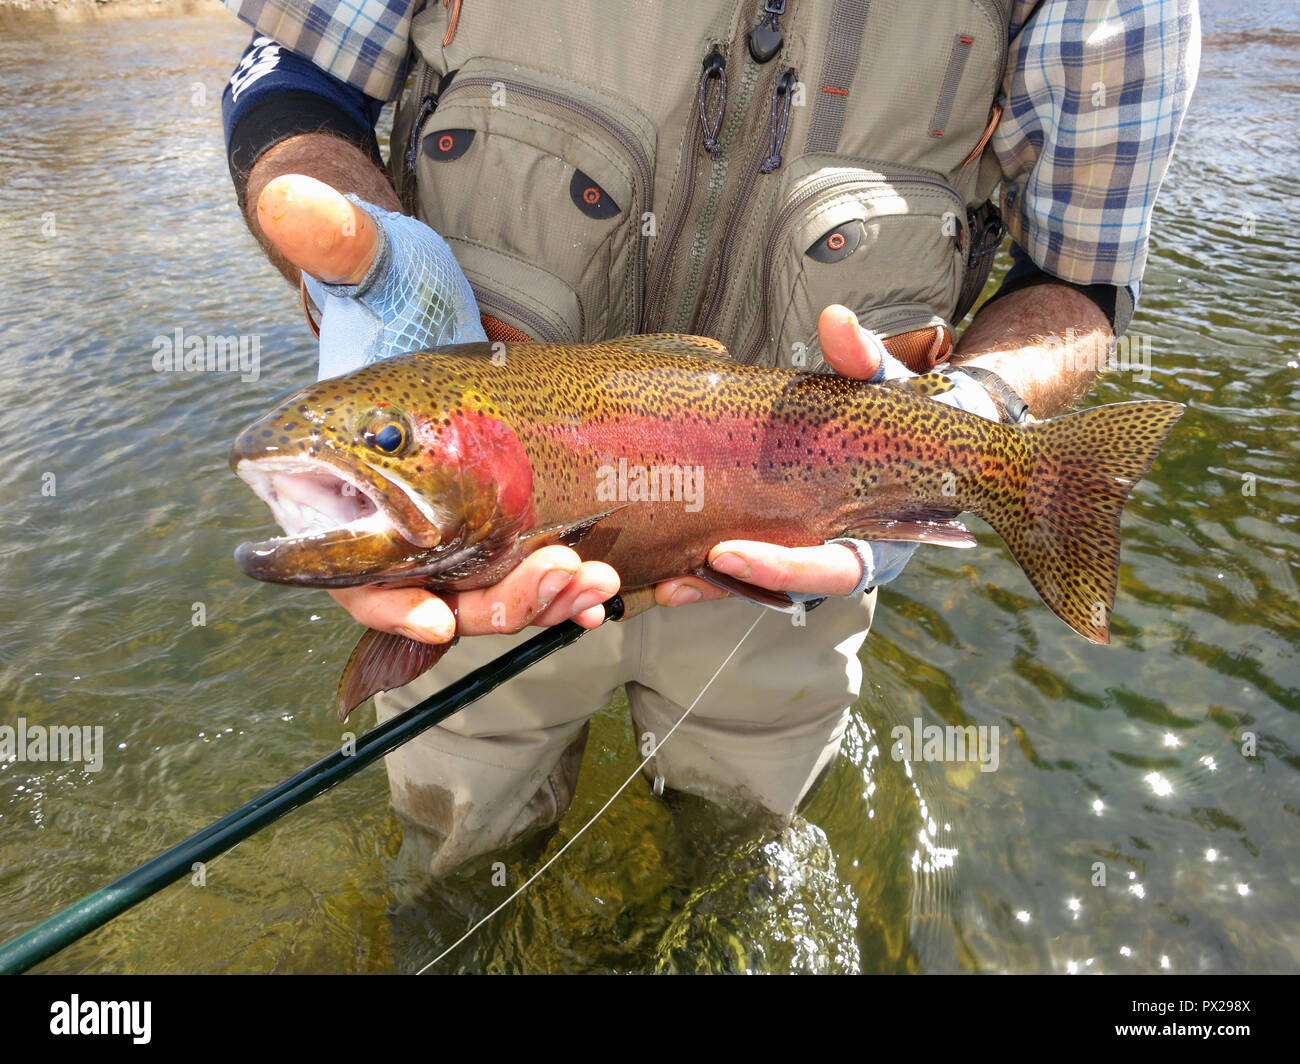 Rainbow trout caught while fly fishing. Stock Photo